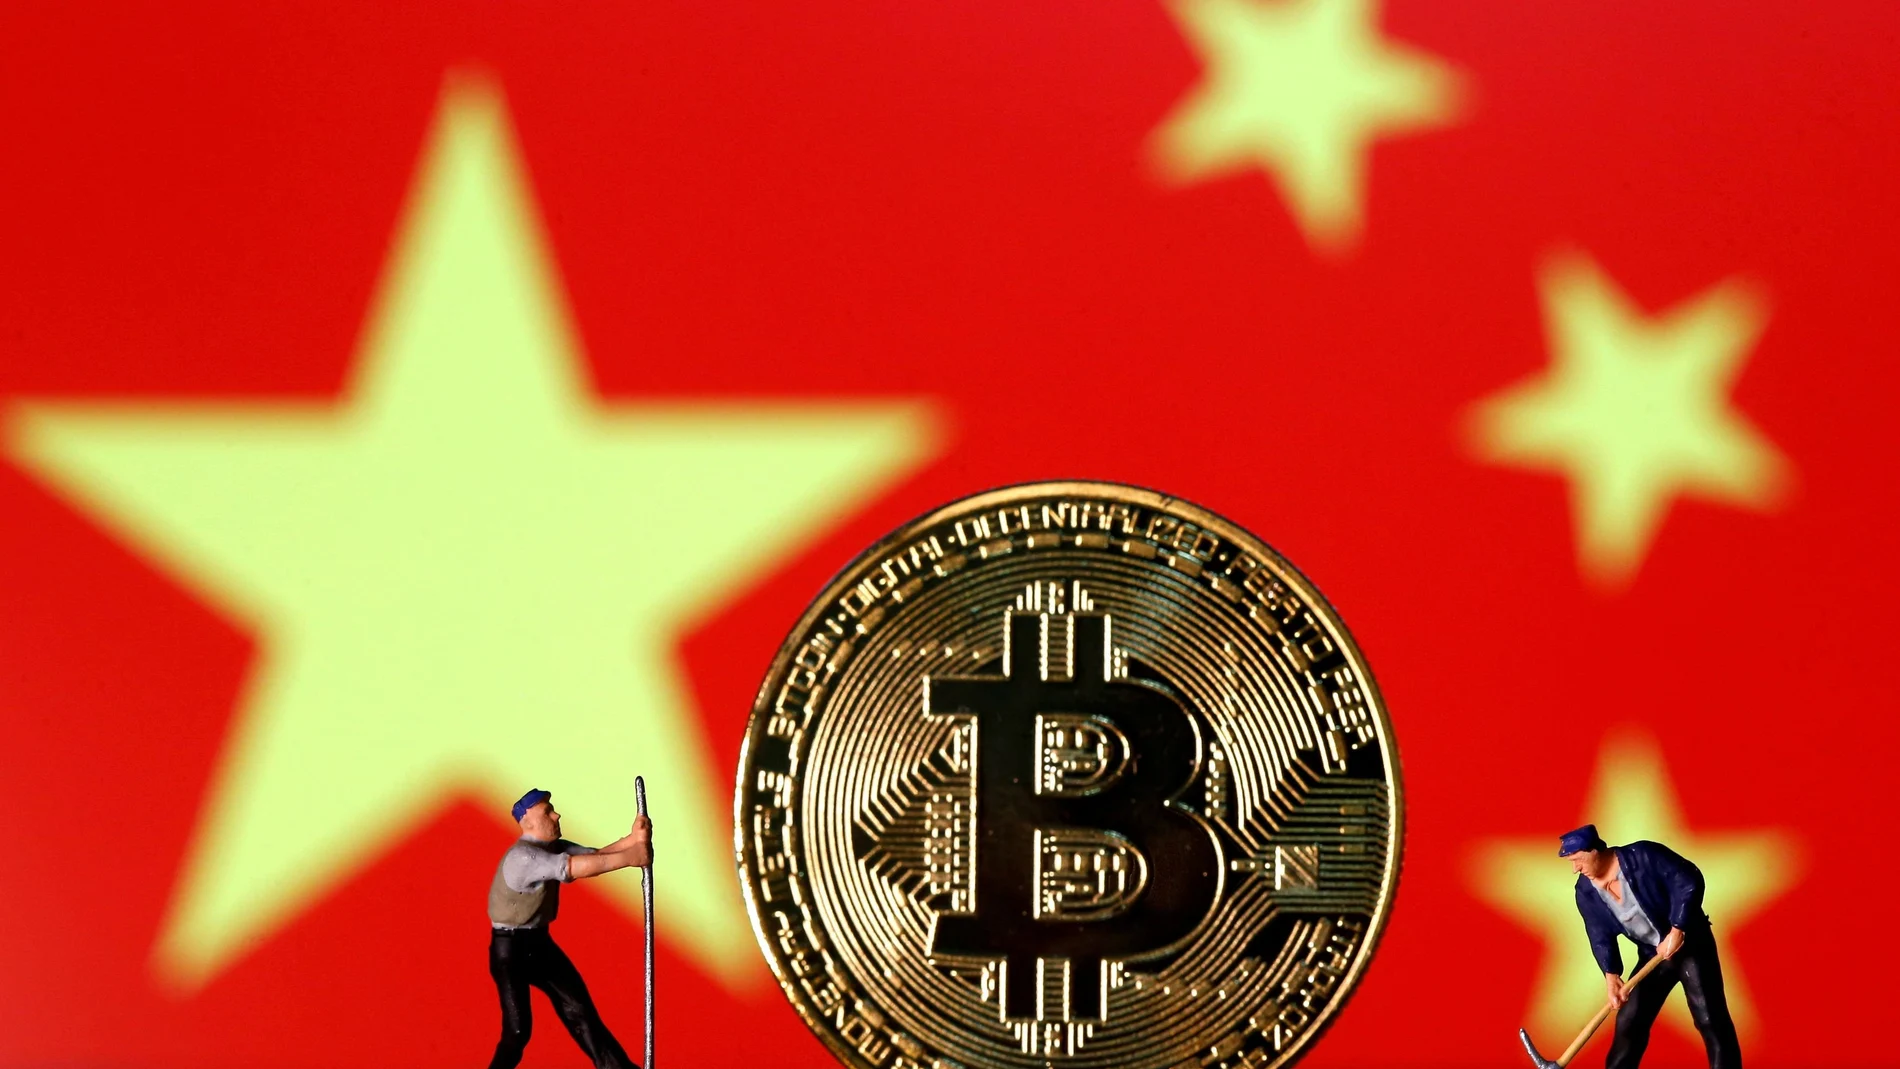 FILE PHOTO: Small toy figurines are seen on representations of the Bitcoin virtual currency displayed in front of an image of China's flag in this illustration picture, April 9, 2019. REUTERS/Dado Ruvic/Illustration/File Photo